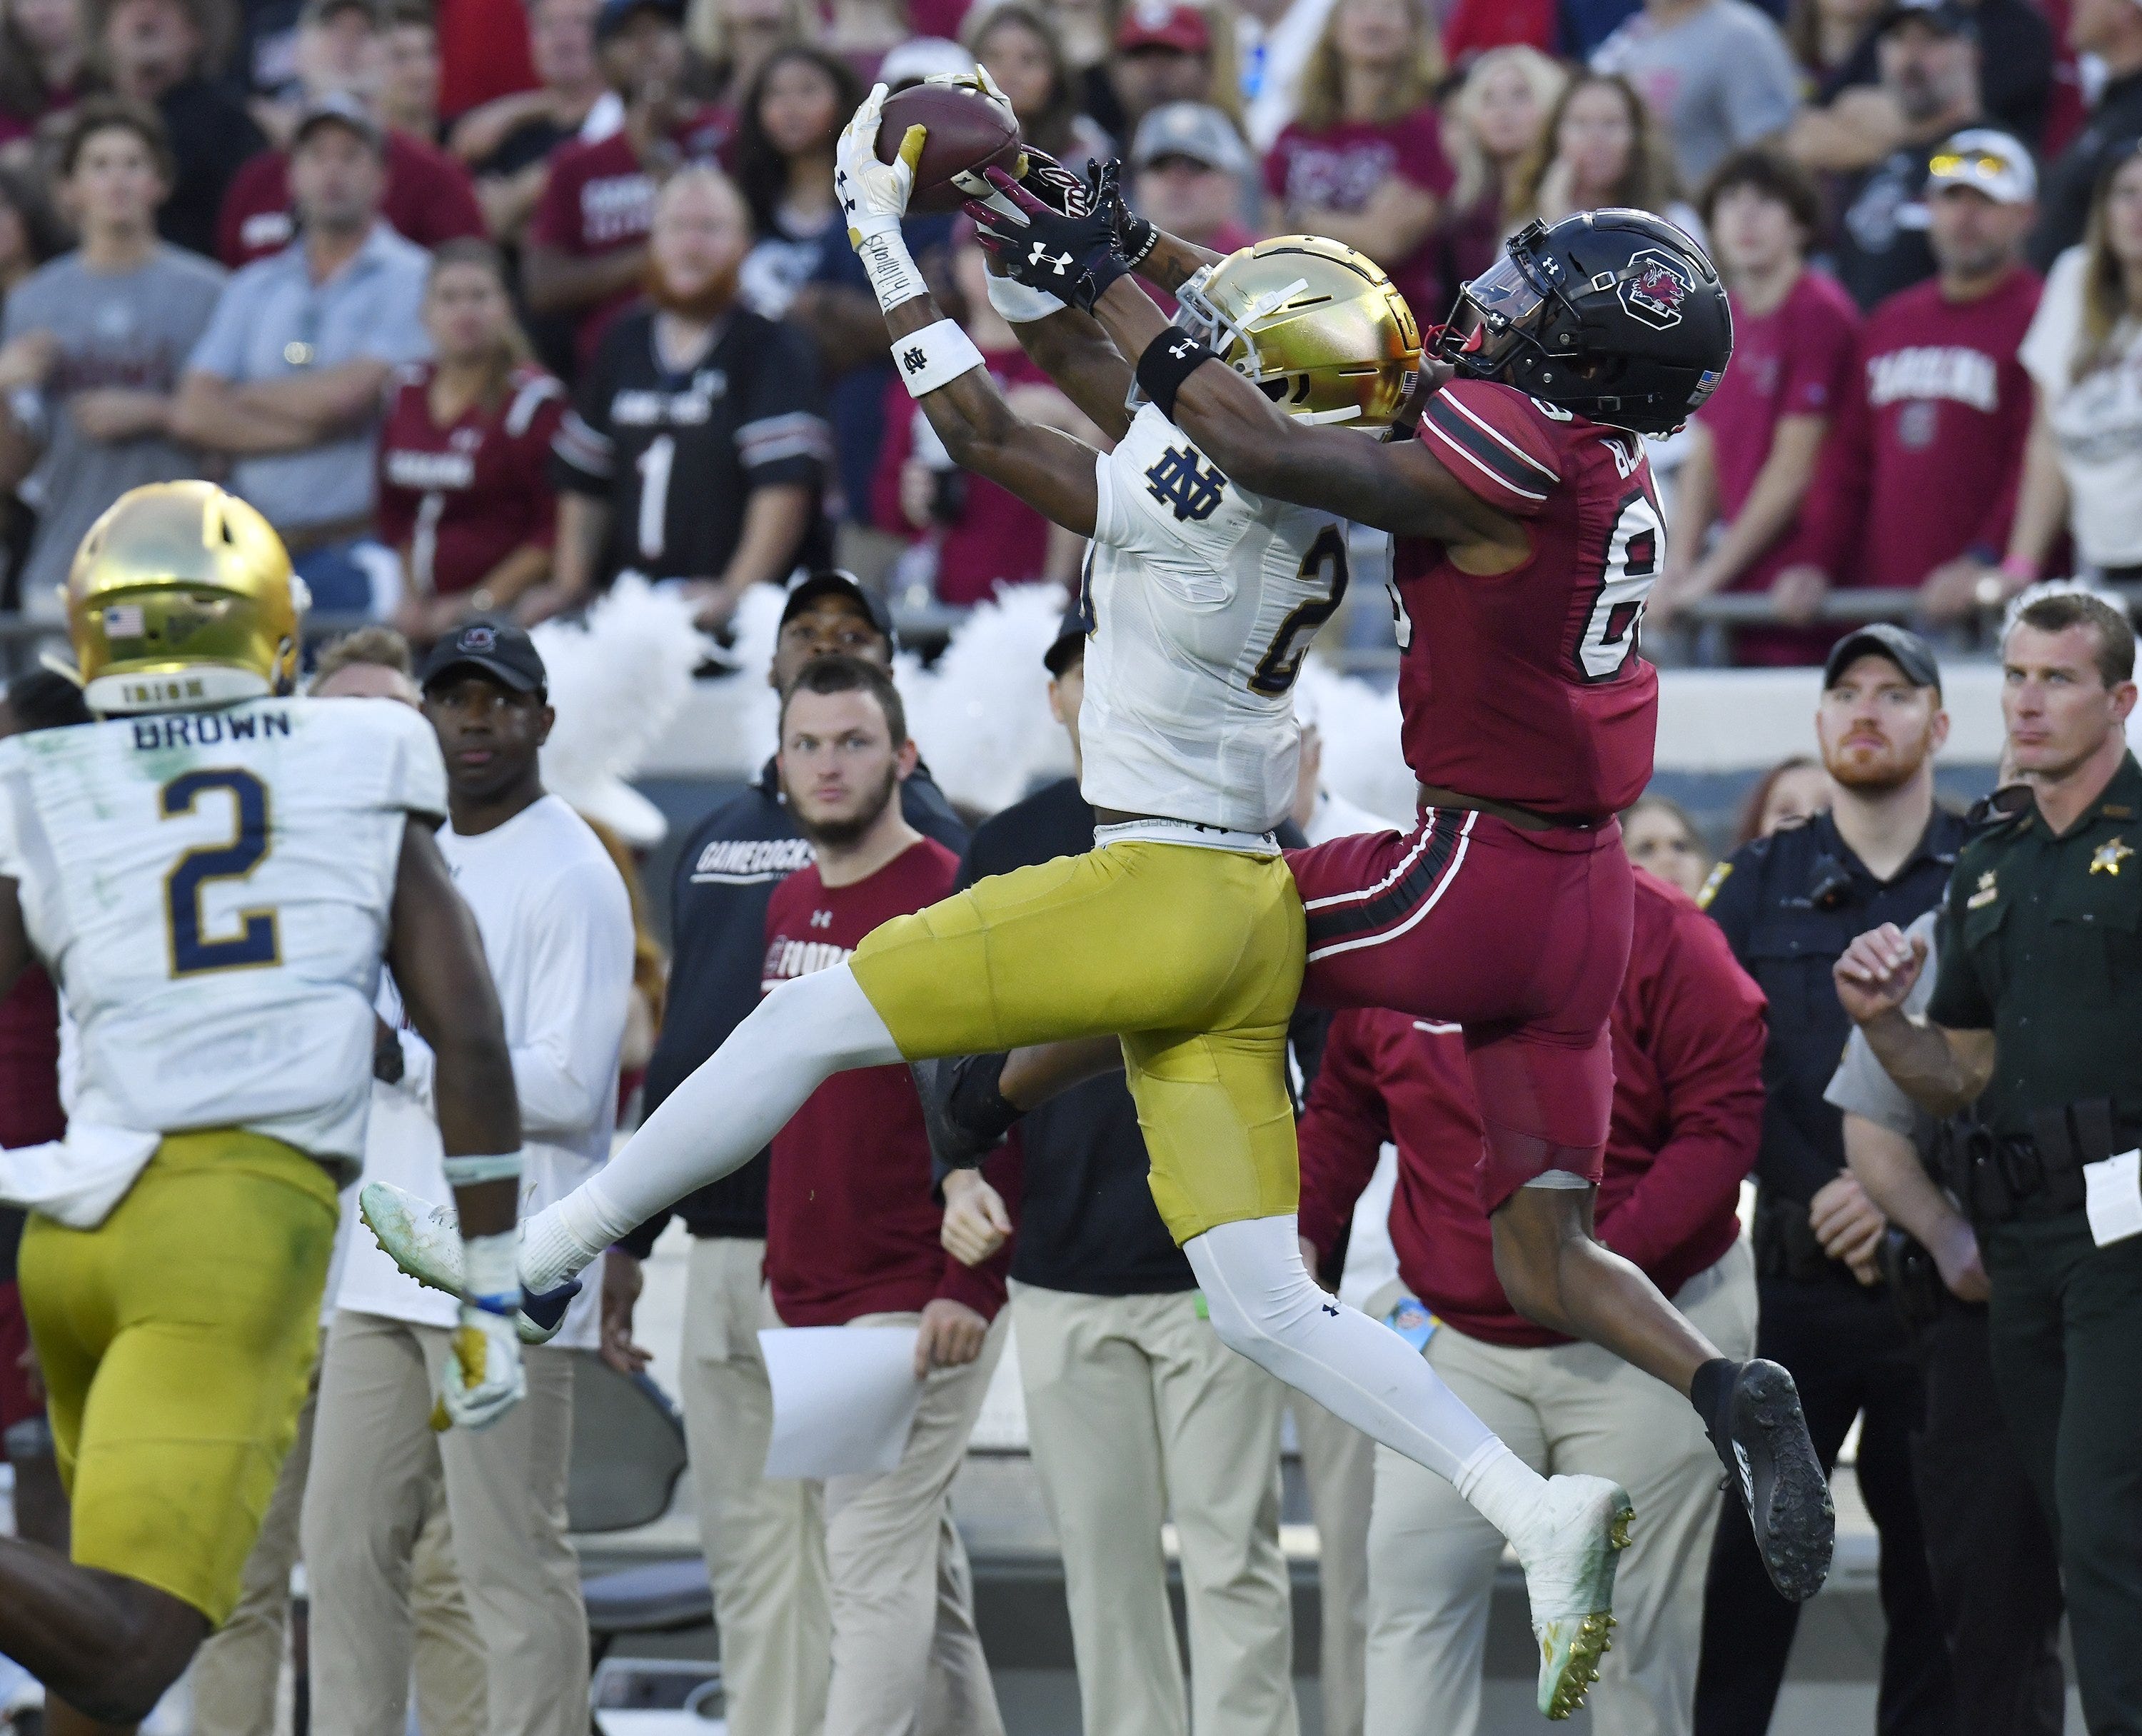 The Good, The Bad, and The Ugly: South Carolina vs. Notre Dame